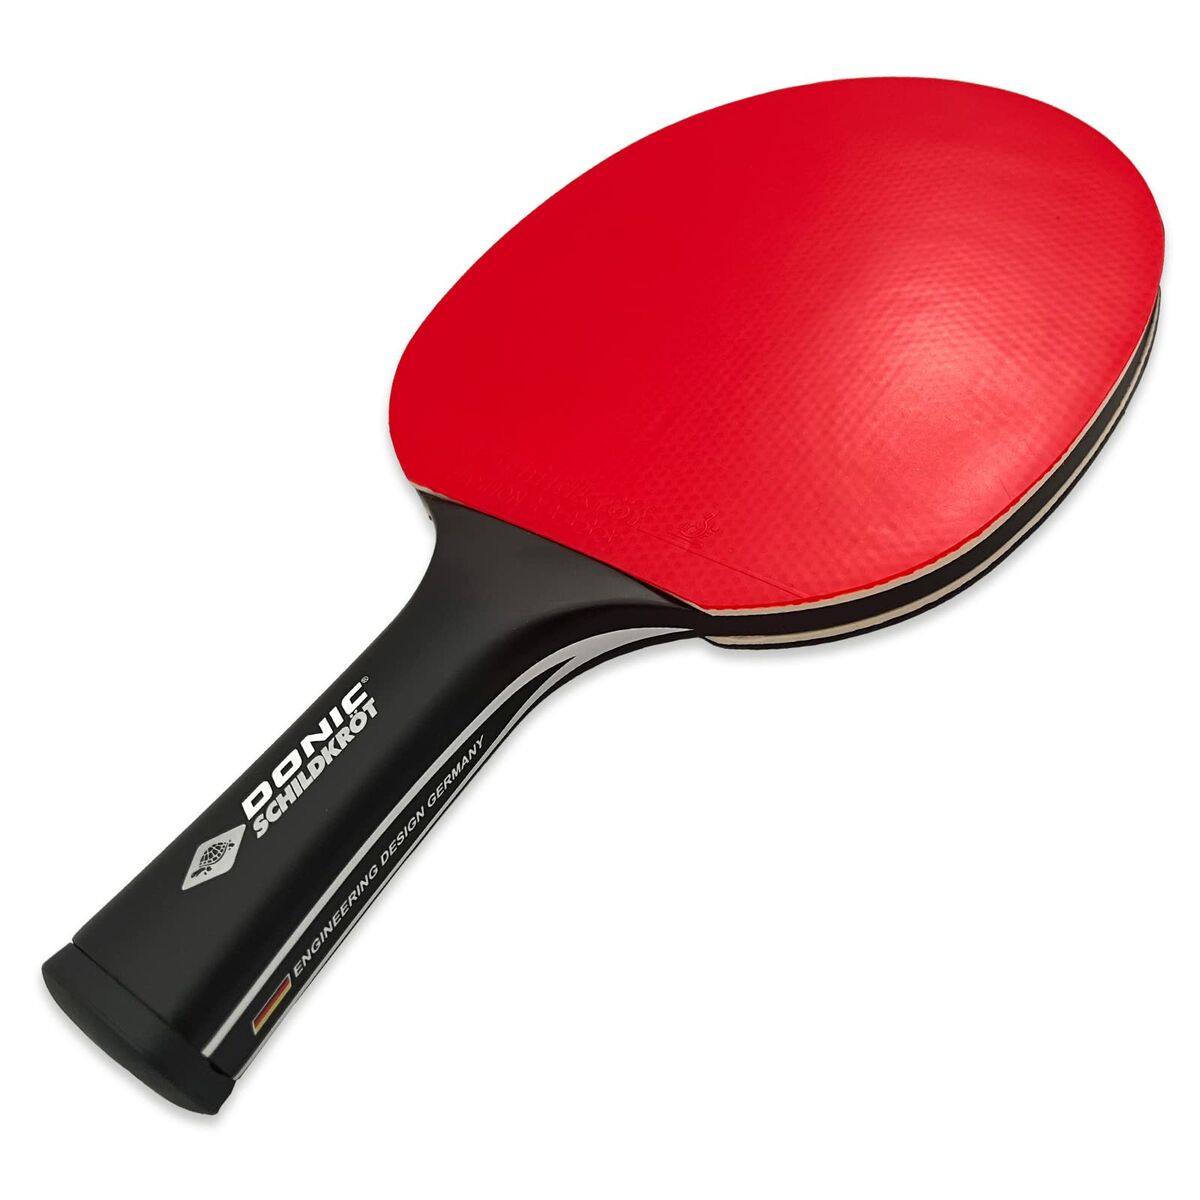 Ping Pong Racket Donic CarboTec 900